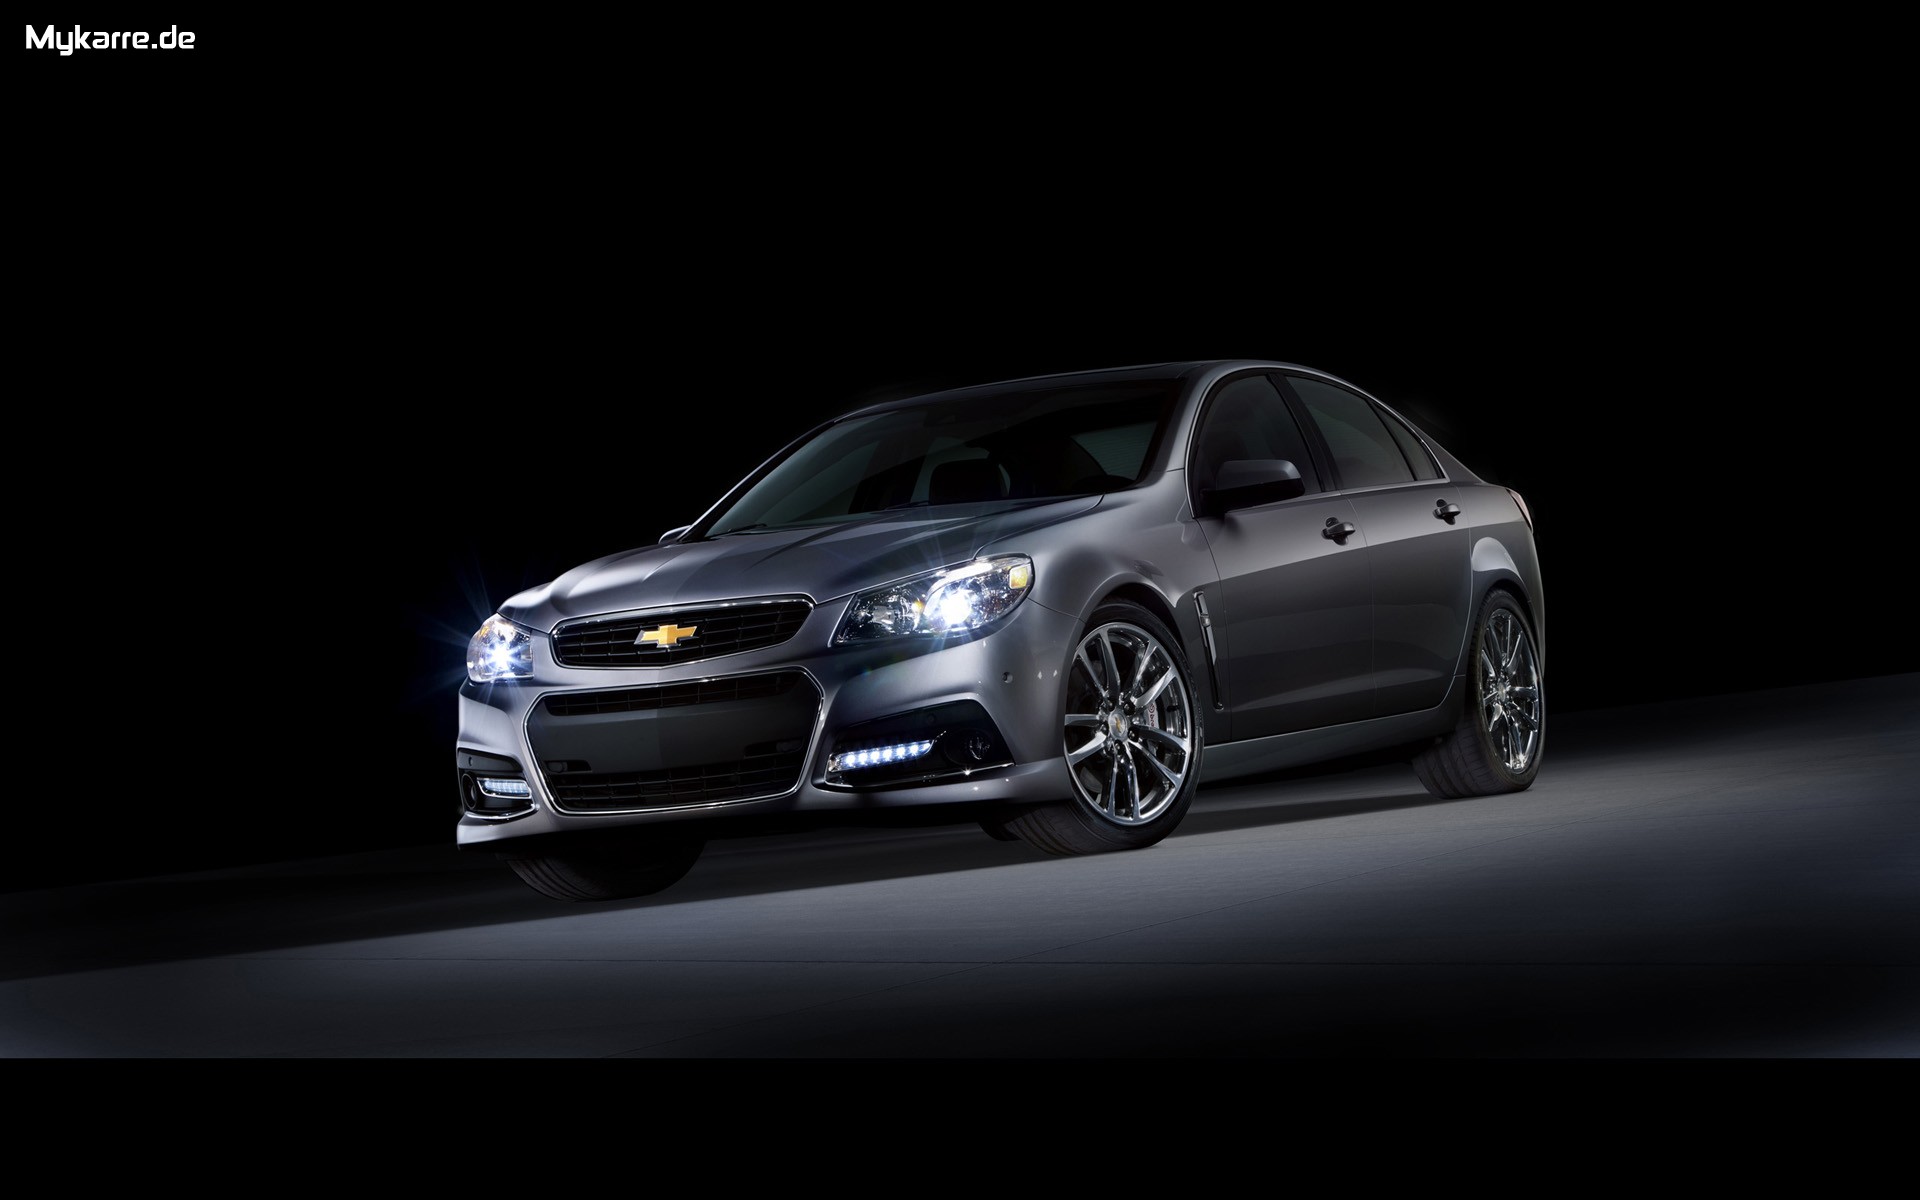 Chevrolet SS 2014 Wallpaper Frontansicht Auto Tuning News   Tuning